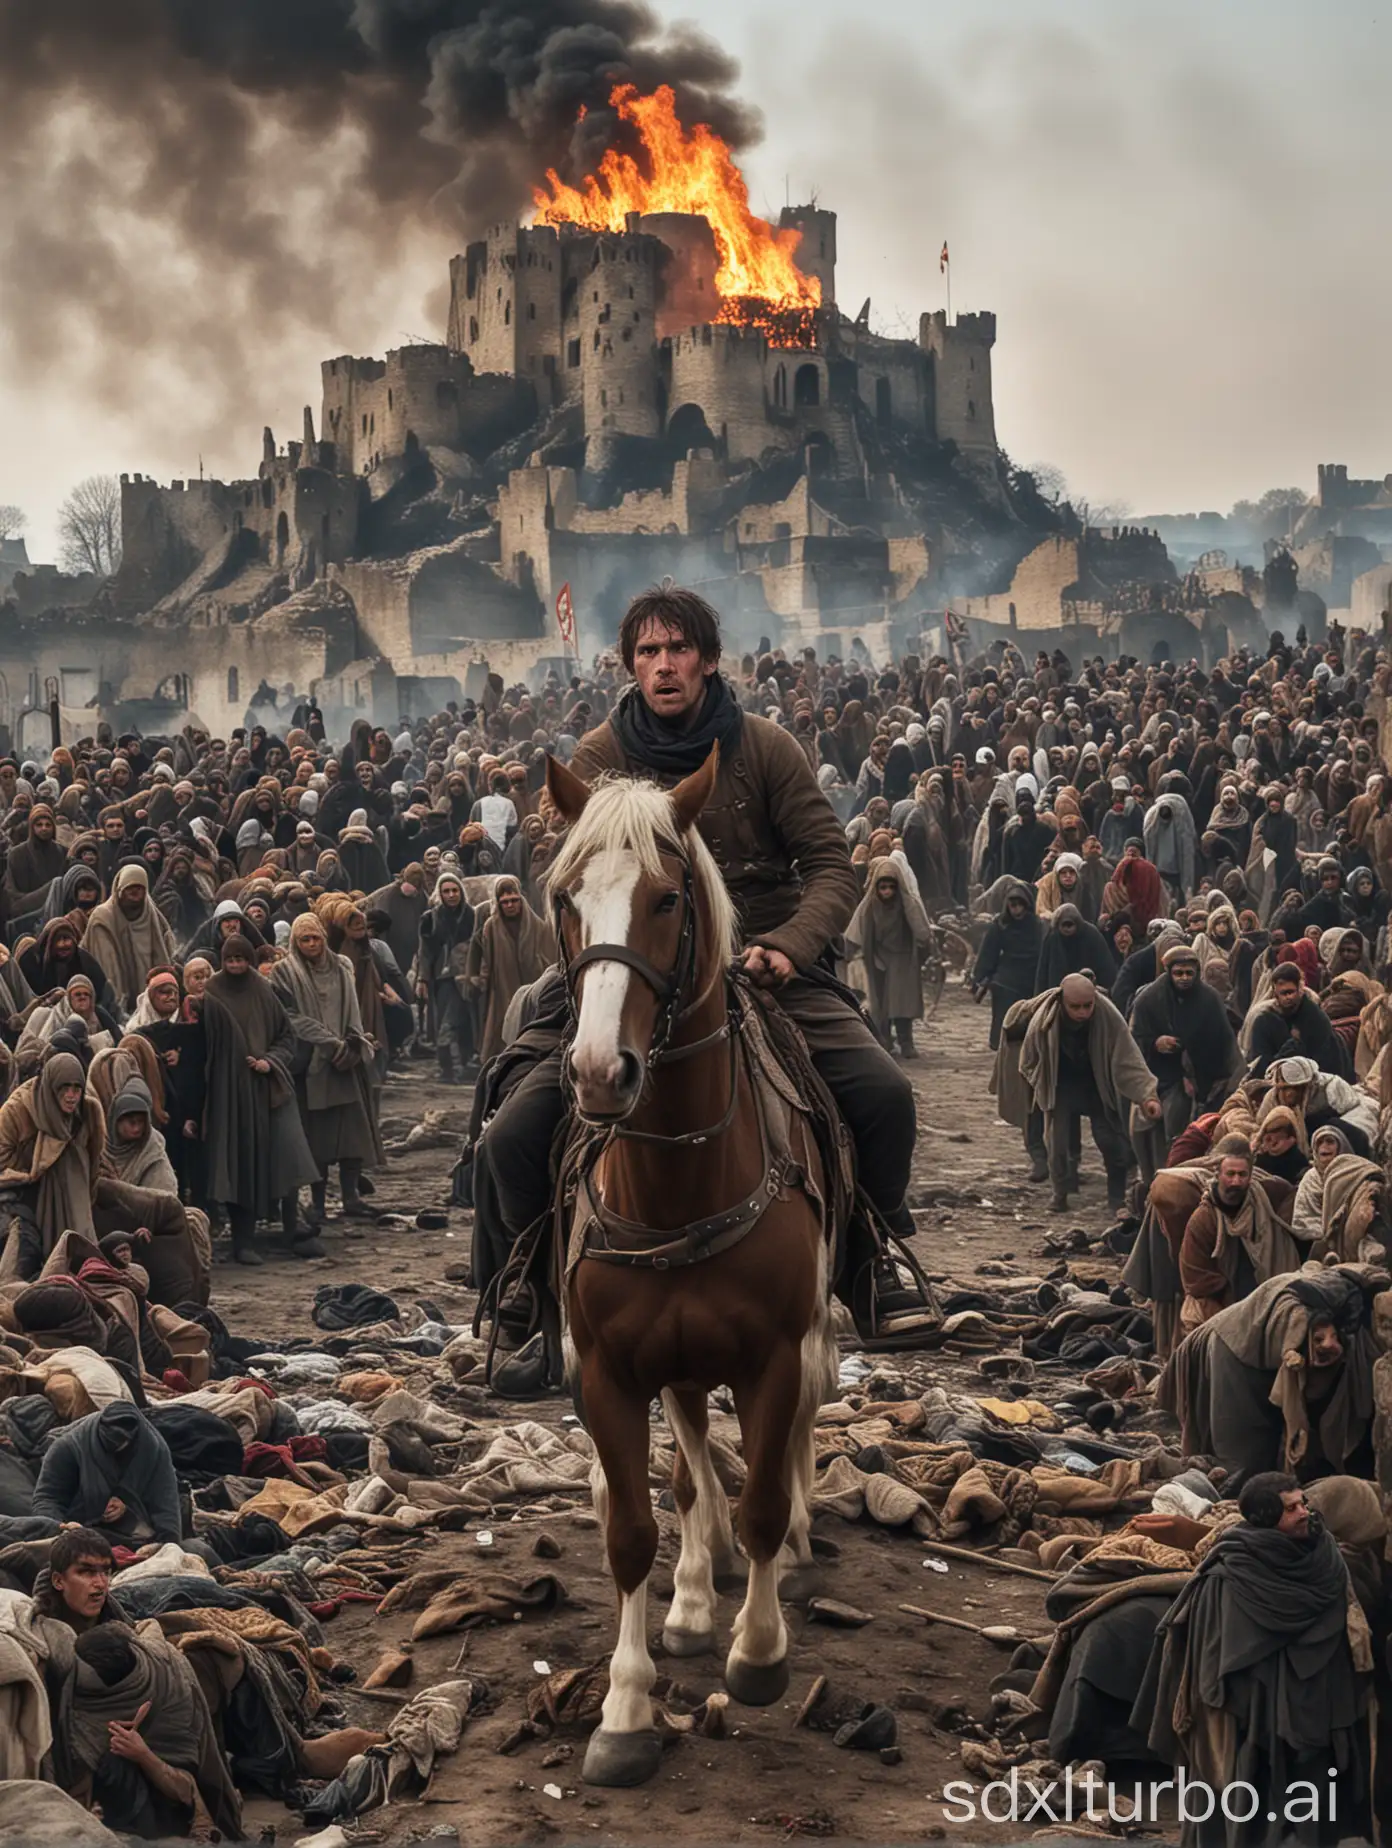 a man on a horse, face visible, many people in rags crawling behind, faces visible, a burning castle behind